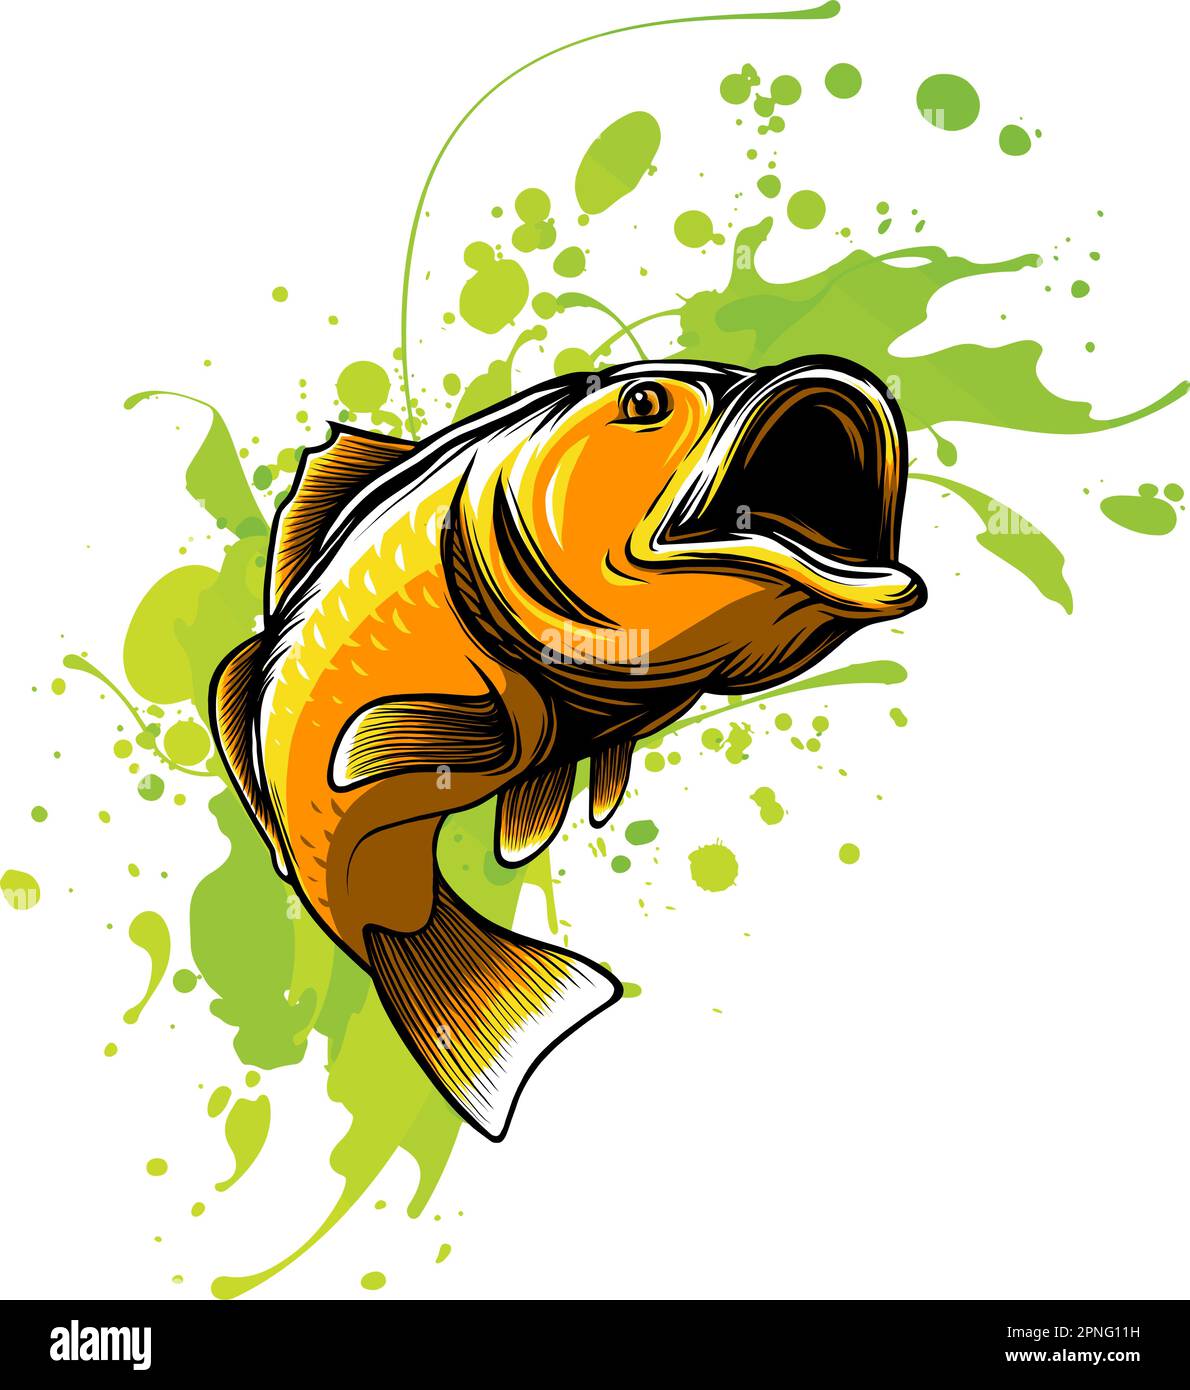 Illustration of a largemouth bass fish jumping done in cartoon style on isolated white background. Stock Vector